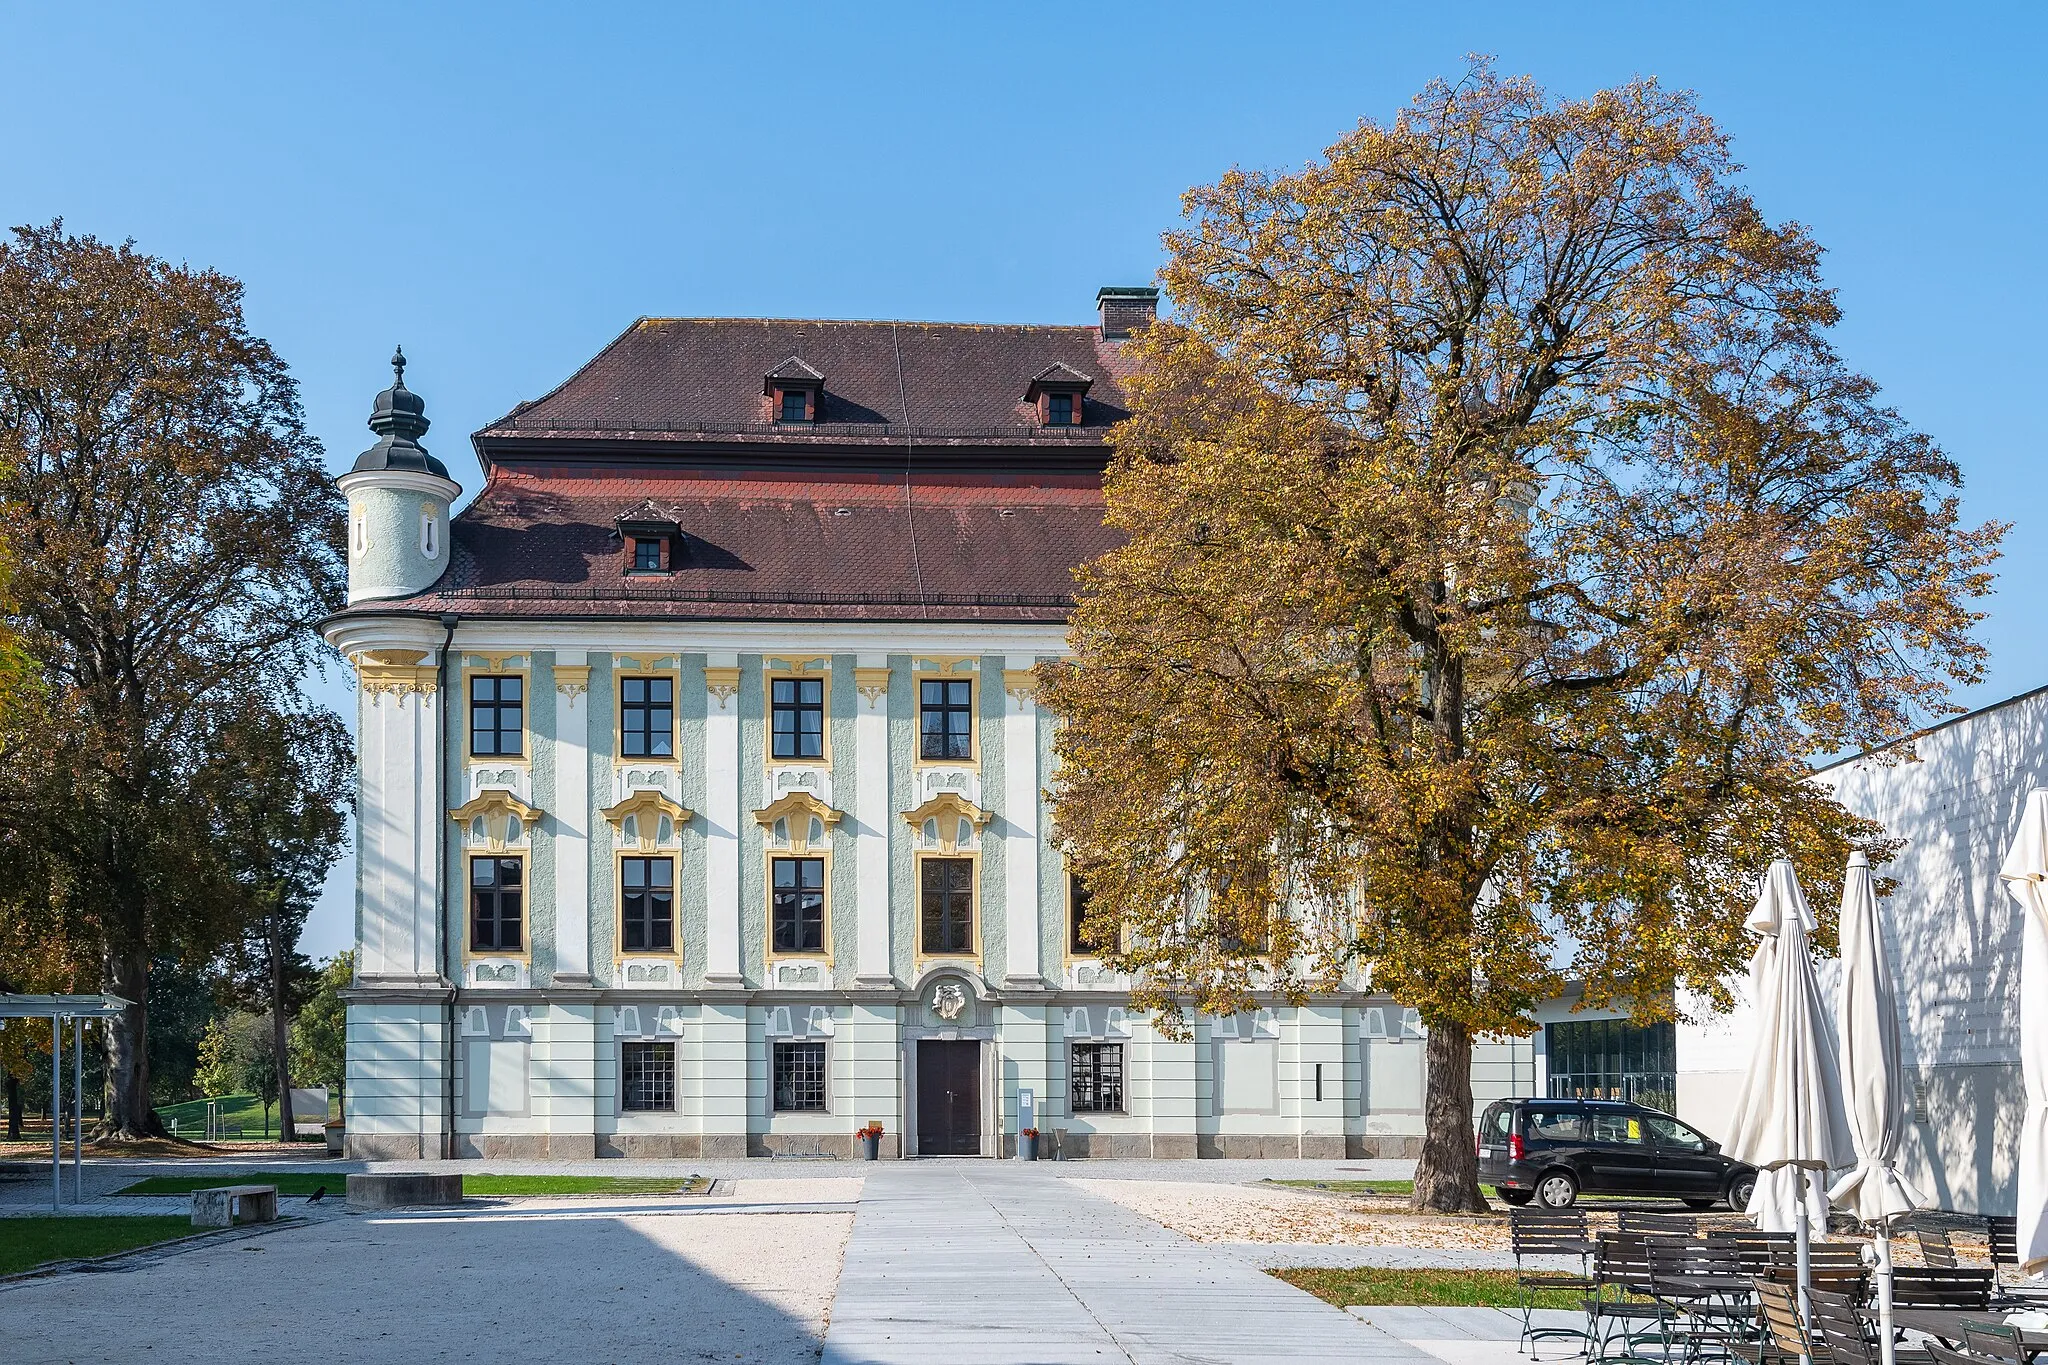 Photo showing: The stately home of castle Traun was probably erected in the second half of the 16th century in the style of the late Renaissance periode. The appearance of the front facade comes from 1725.